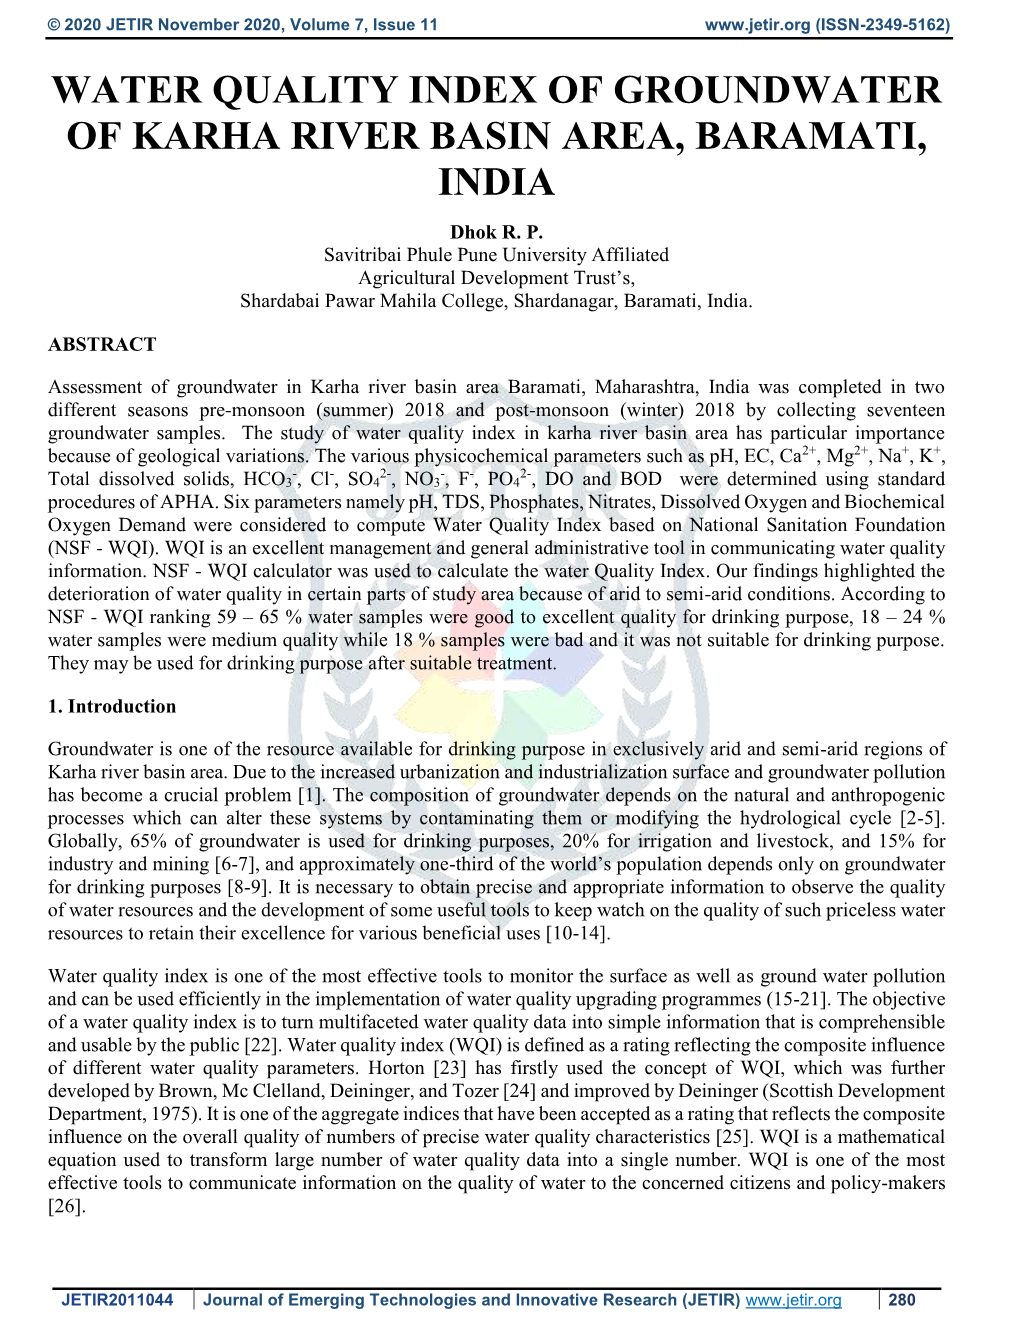 WATER QUALITY INDEX of GROUNDWATER of KARHA RIVER BASIN AREA, BARAMATI, INDIA Dhok R